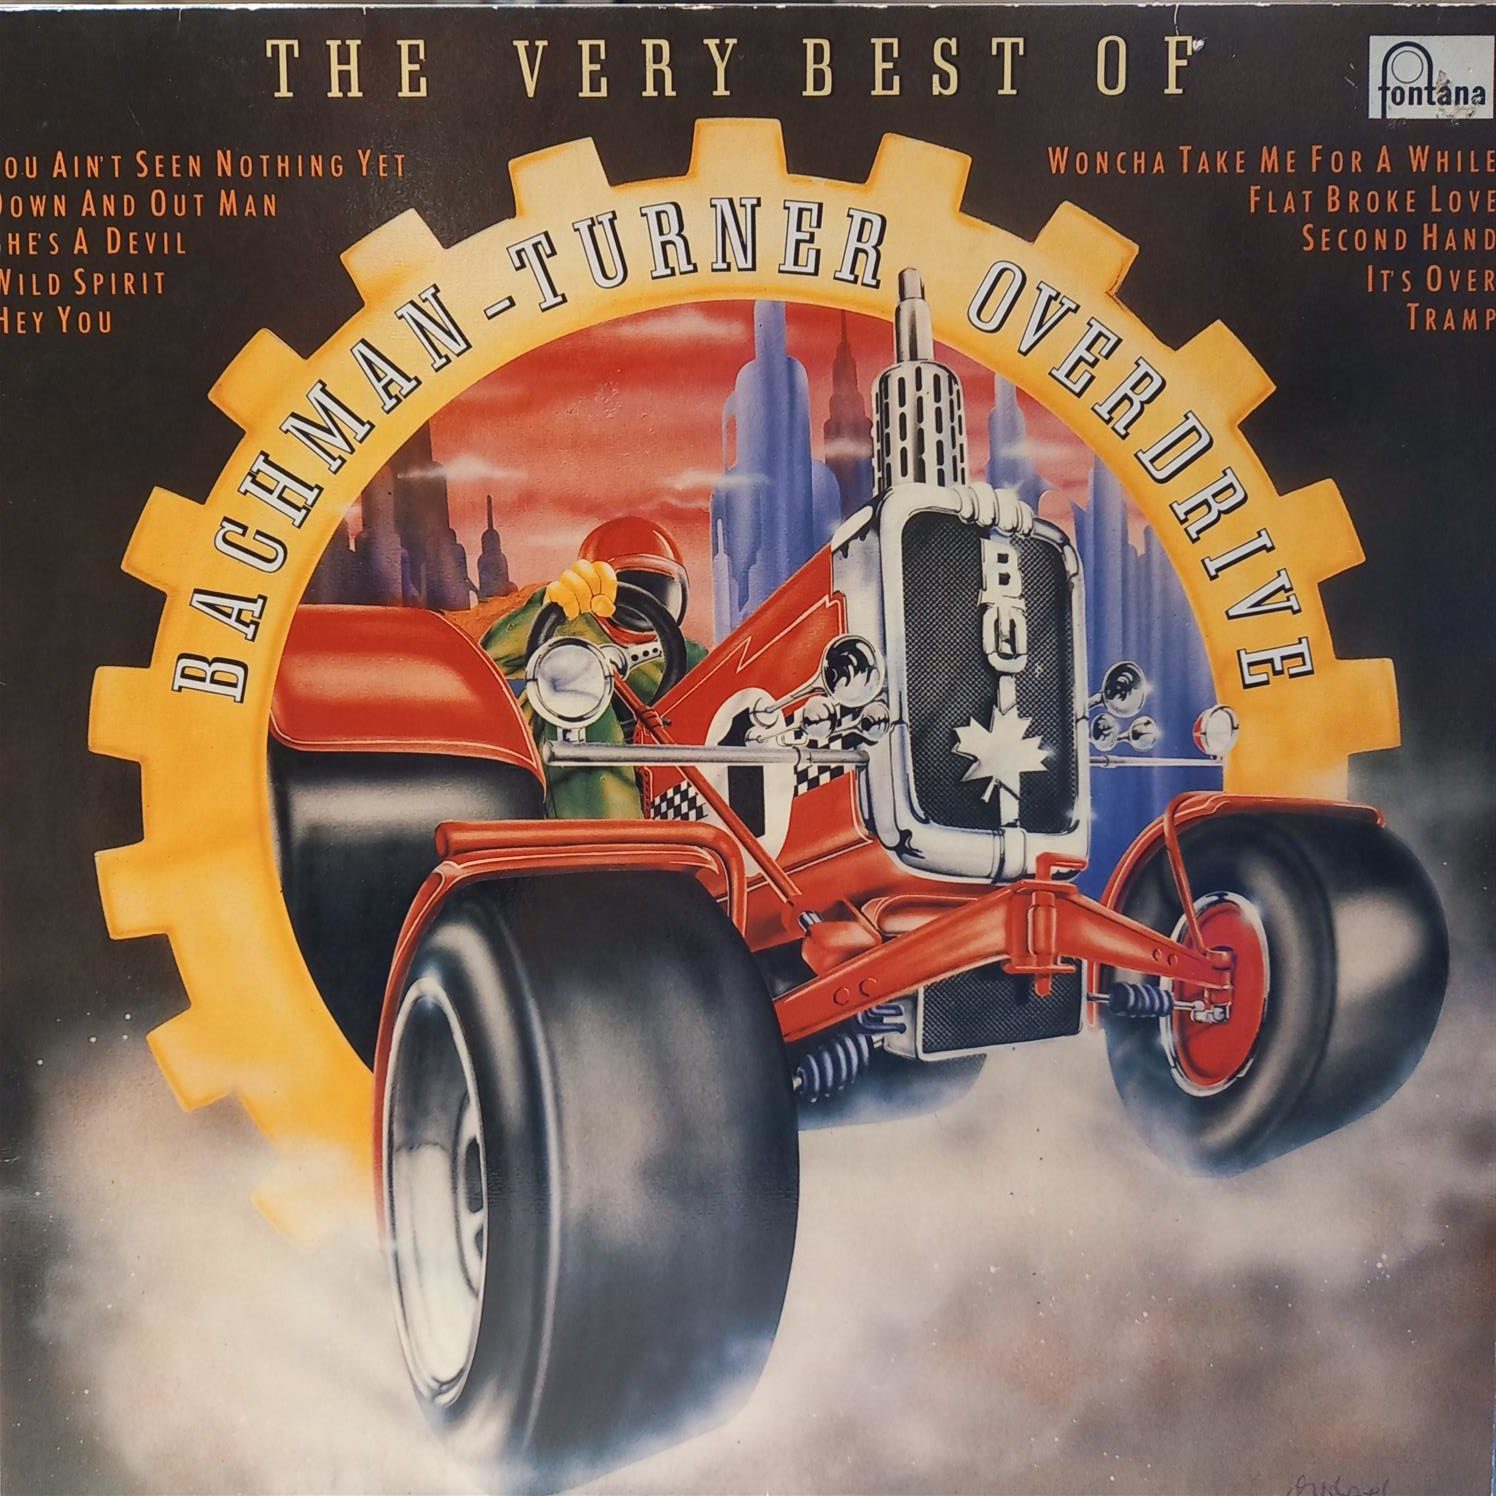 BACHMAN TURNER OVERDRIVE – THE VERY BEST OF ON